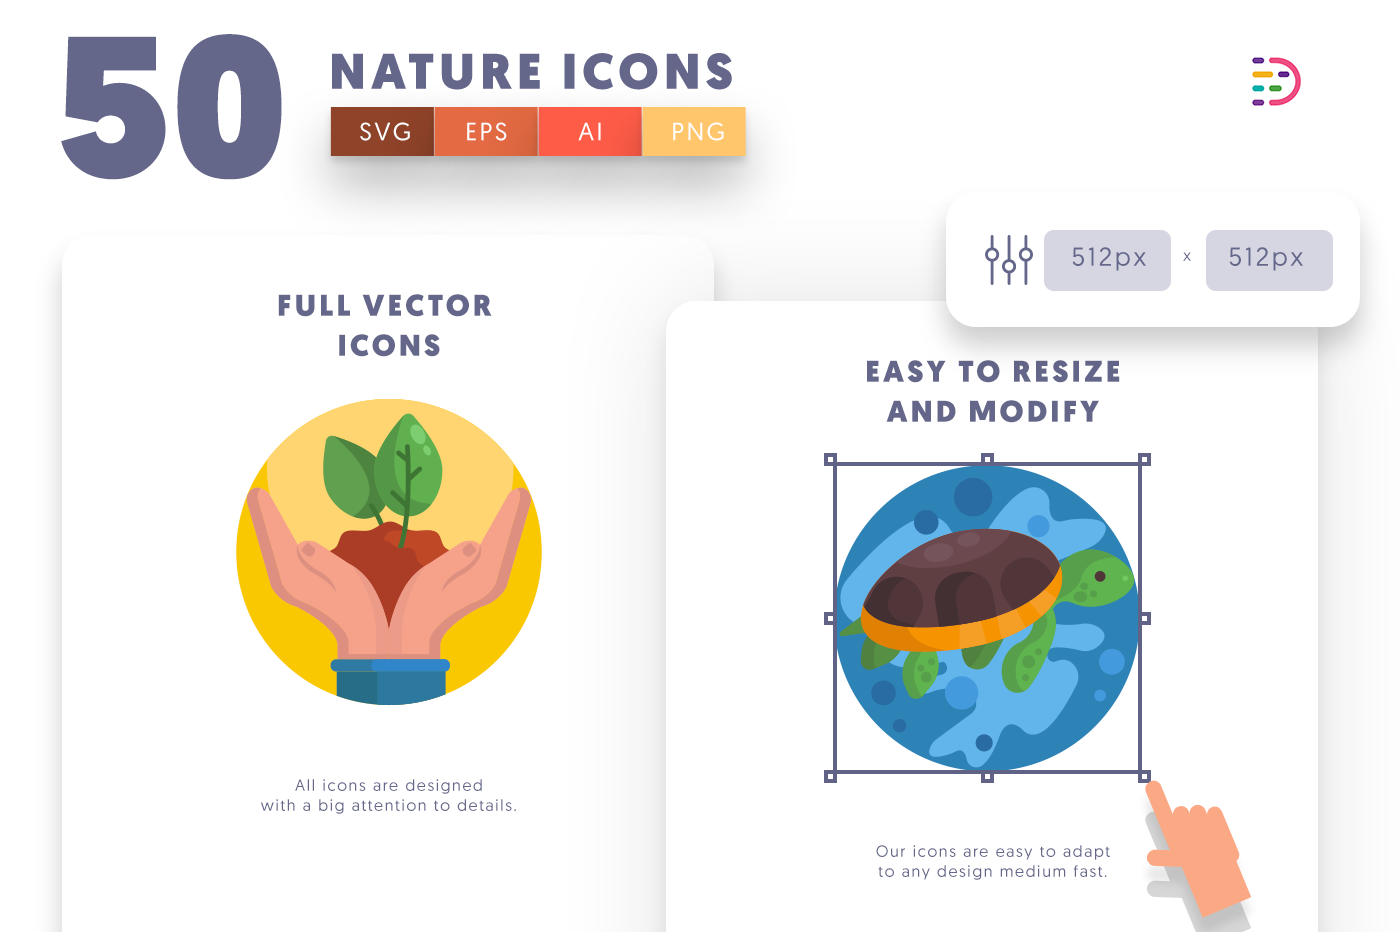 Full vector 50 Nature Icons